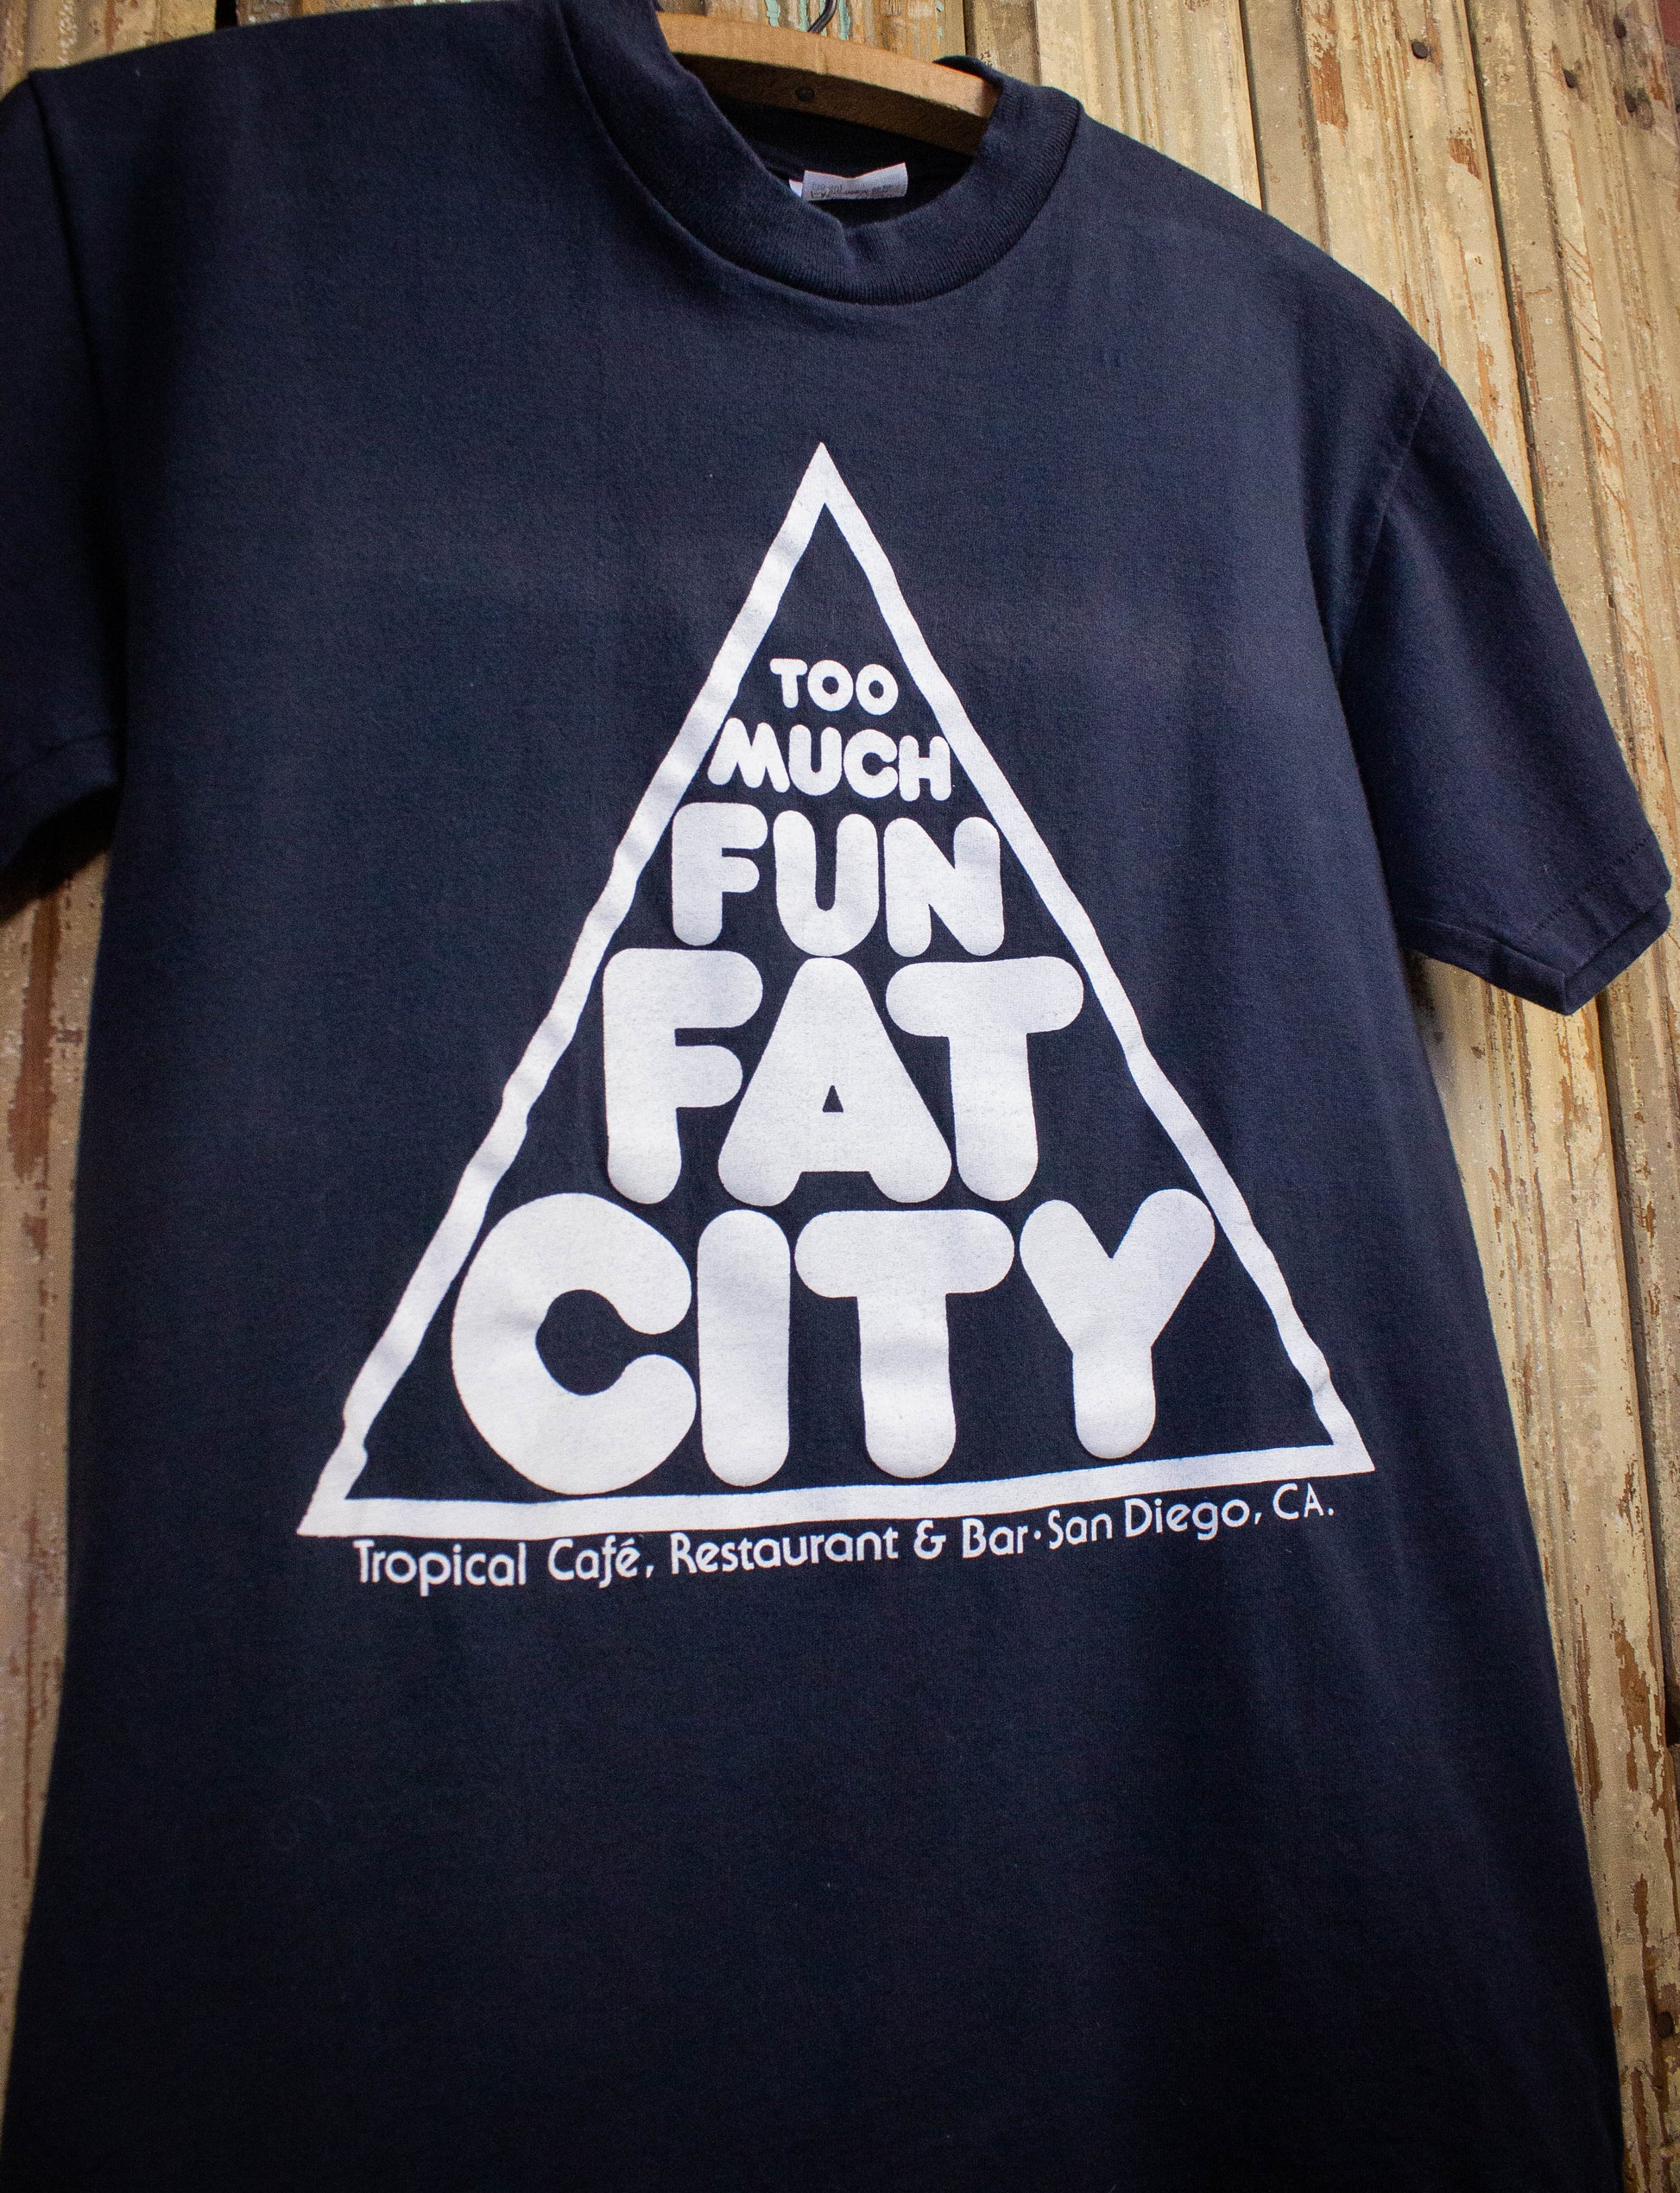 Vintage Too Much Fun Fat City Graphic T Shirt 90s Black Small/Medium